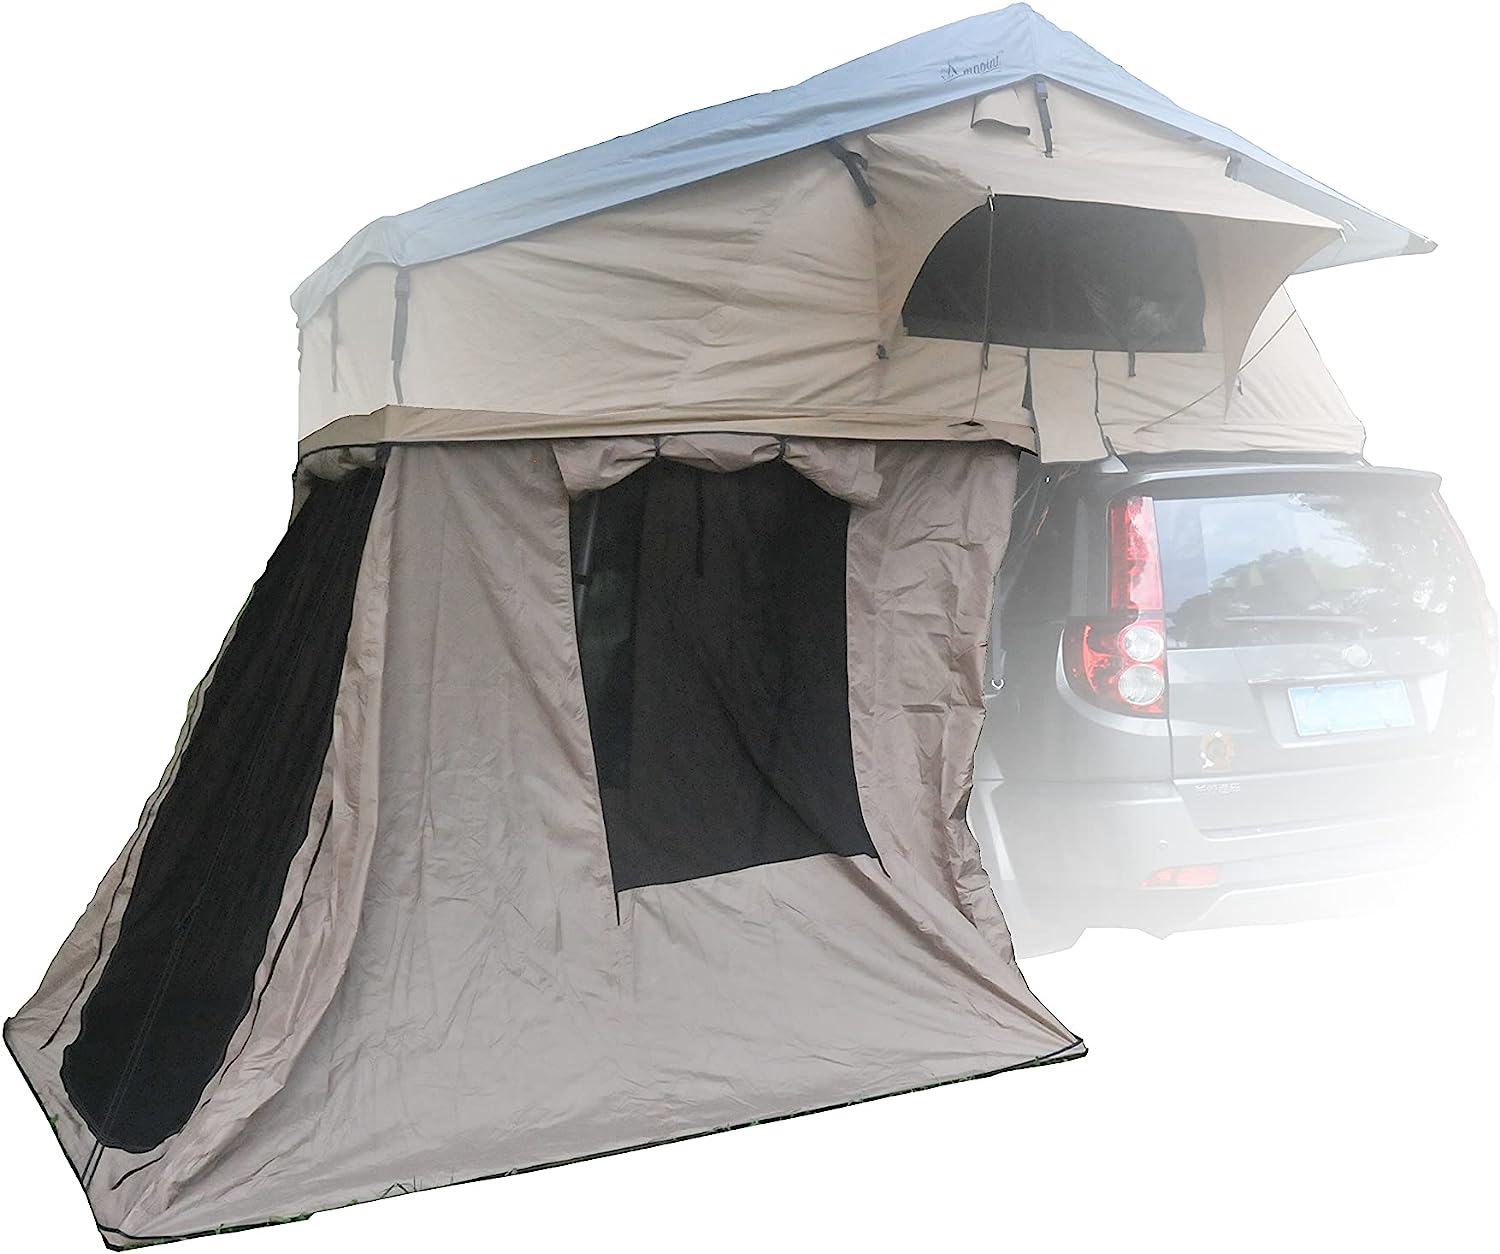 Campoint Rooftop Tent